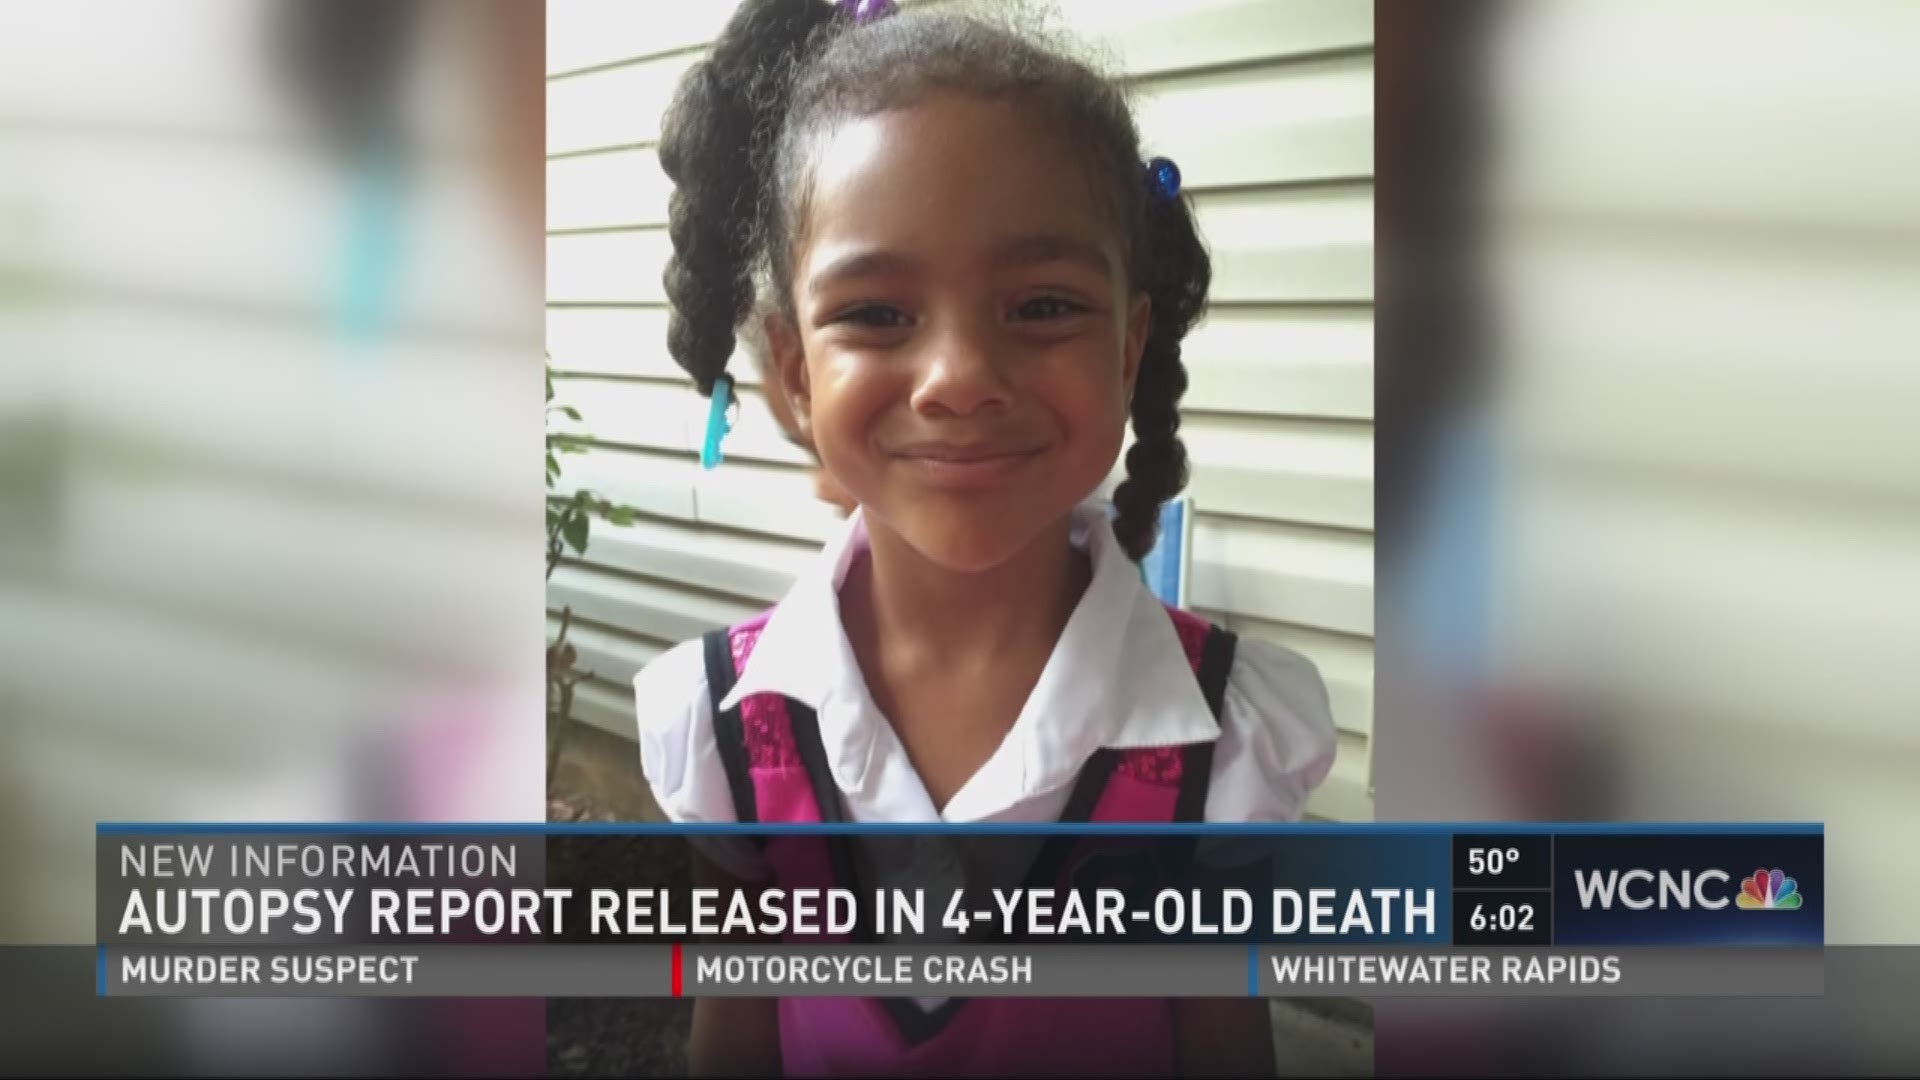 A 4-year-old girl who was killed on Christmas Eve died from blunt force injuries, according to an autopsy report released Friday.